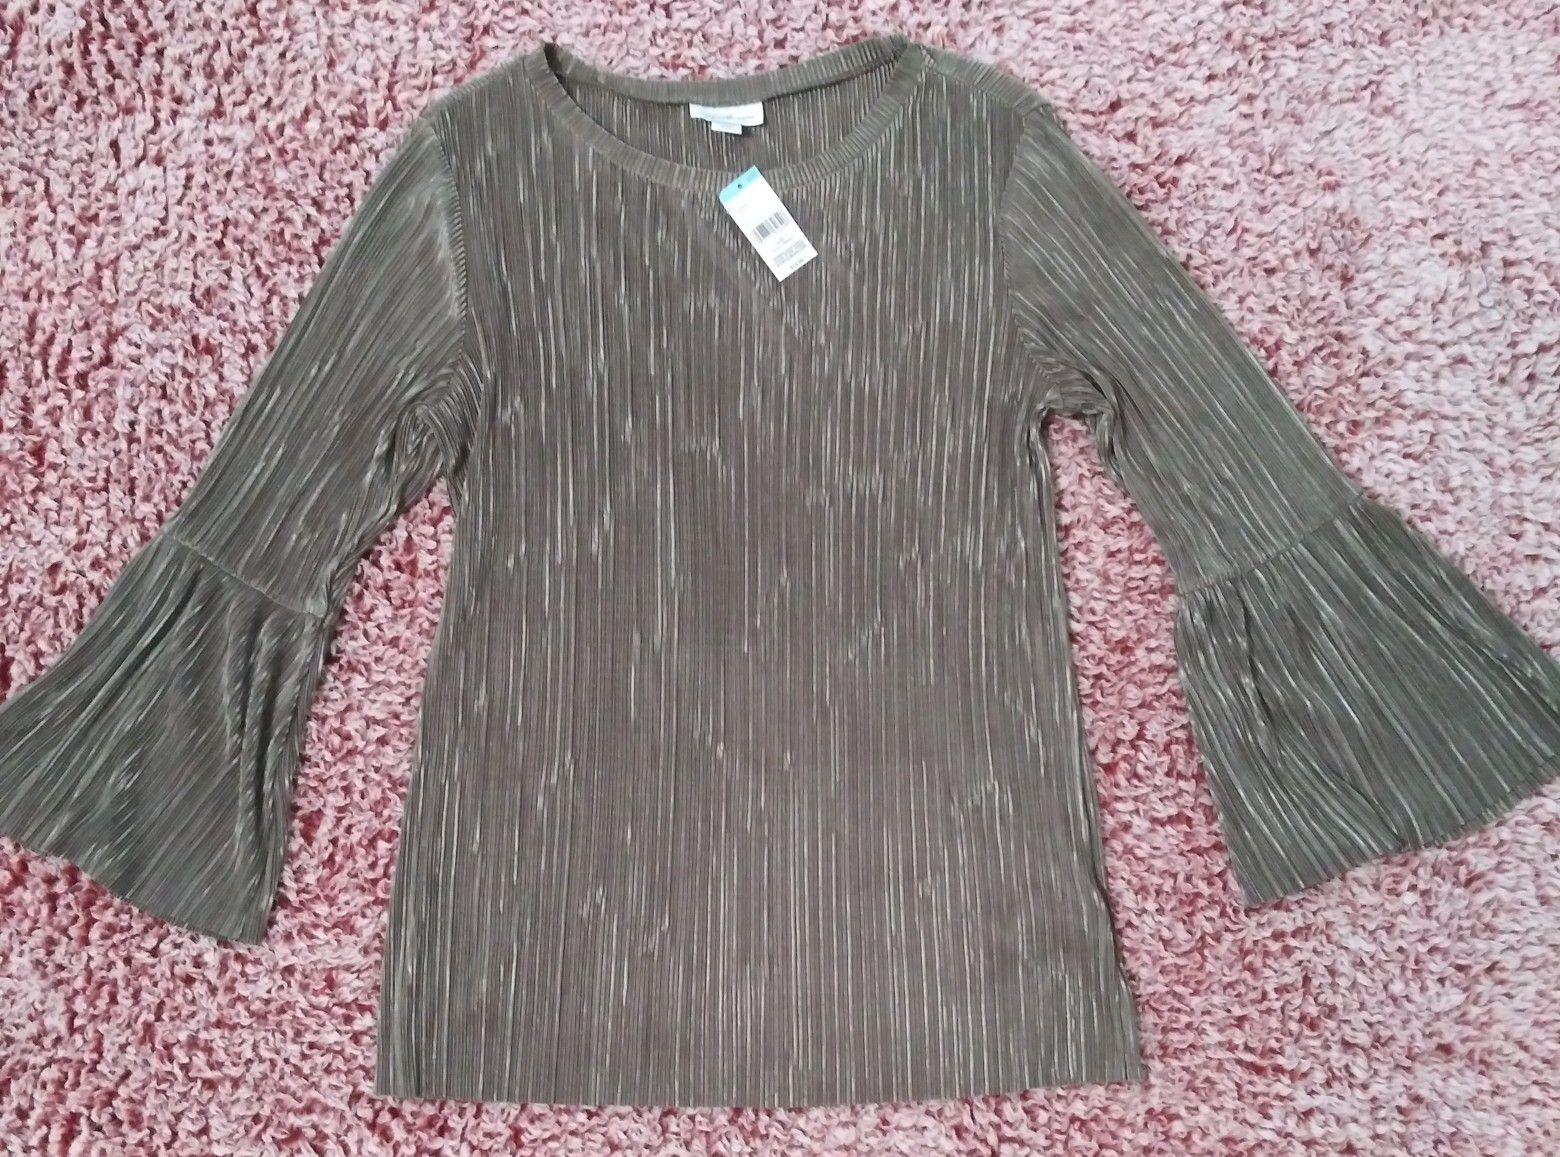 NWT Jaclyn Smith Top Size Large, Crinkle Design, Olive Green, Flared Wrists